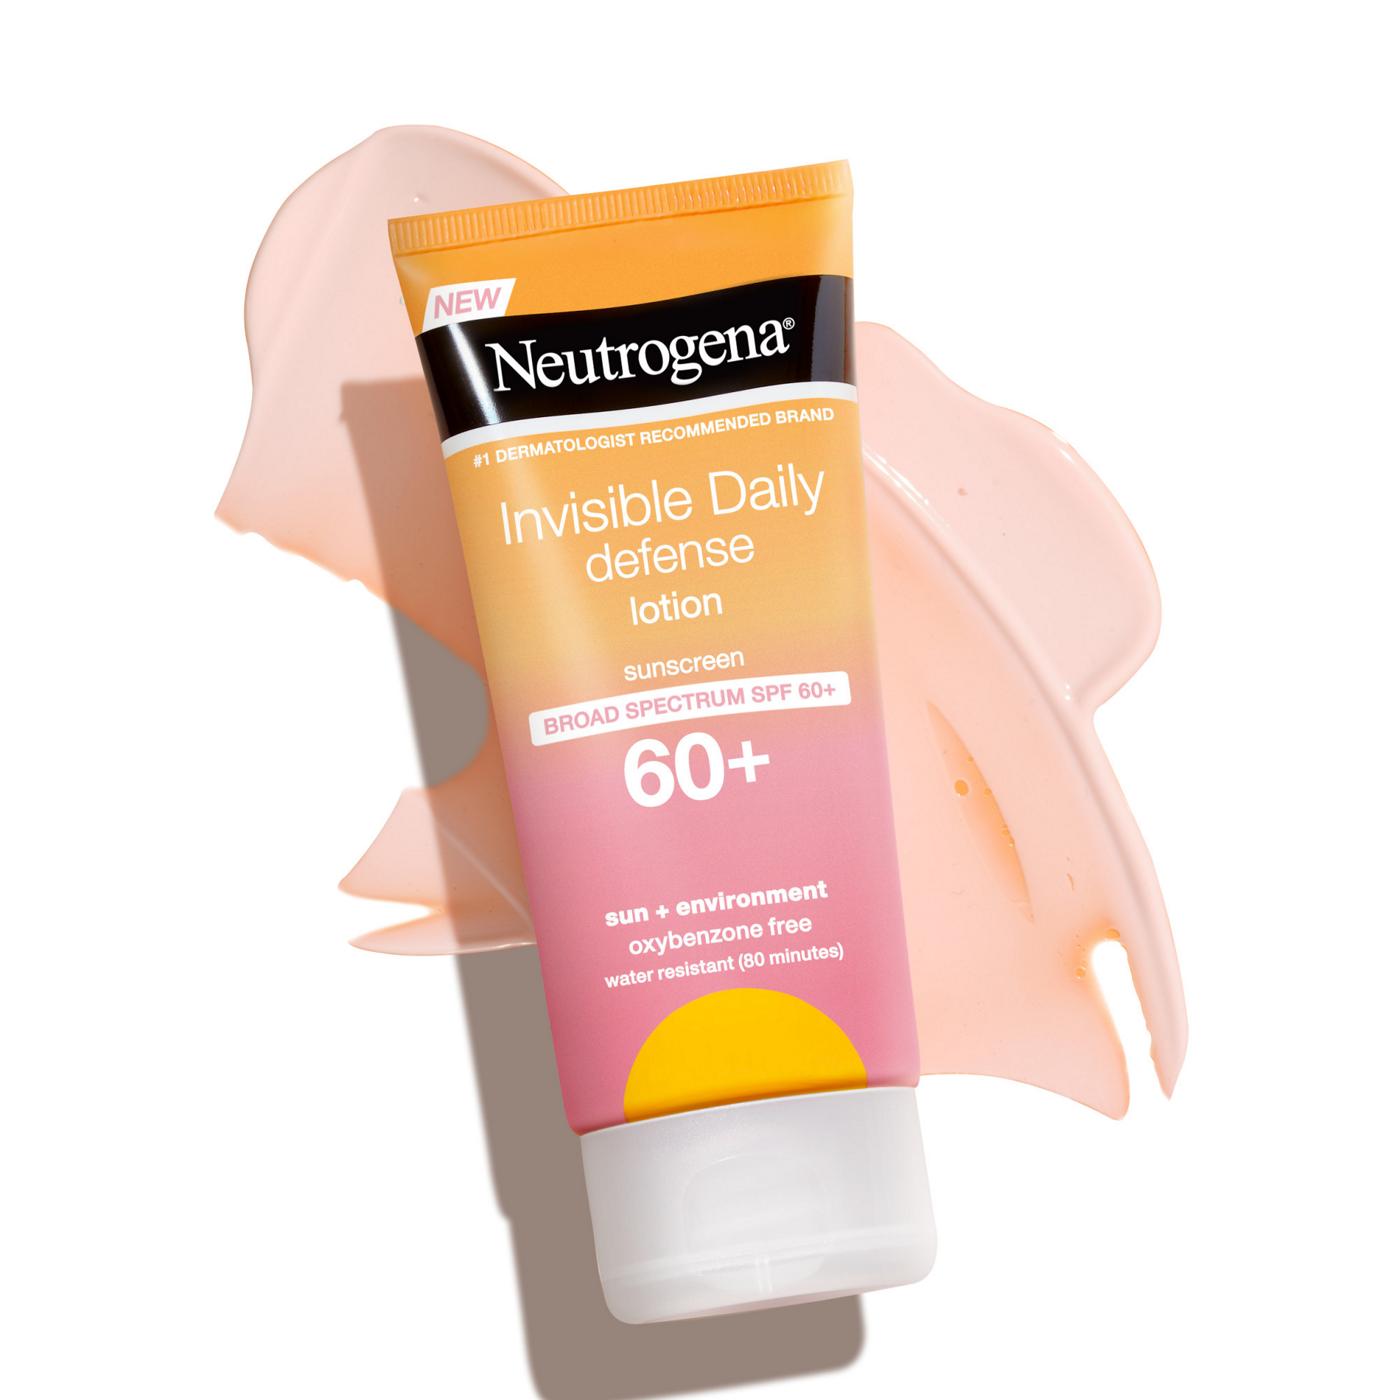 Neutrogena Invisible Daily Defense Sunscreen Lotion - SPF 60+; image 4 of 6